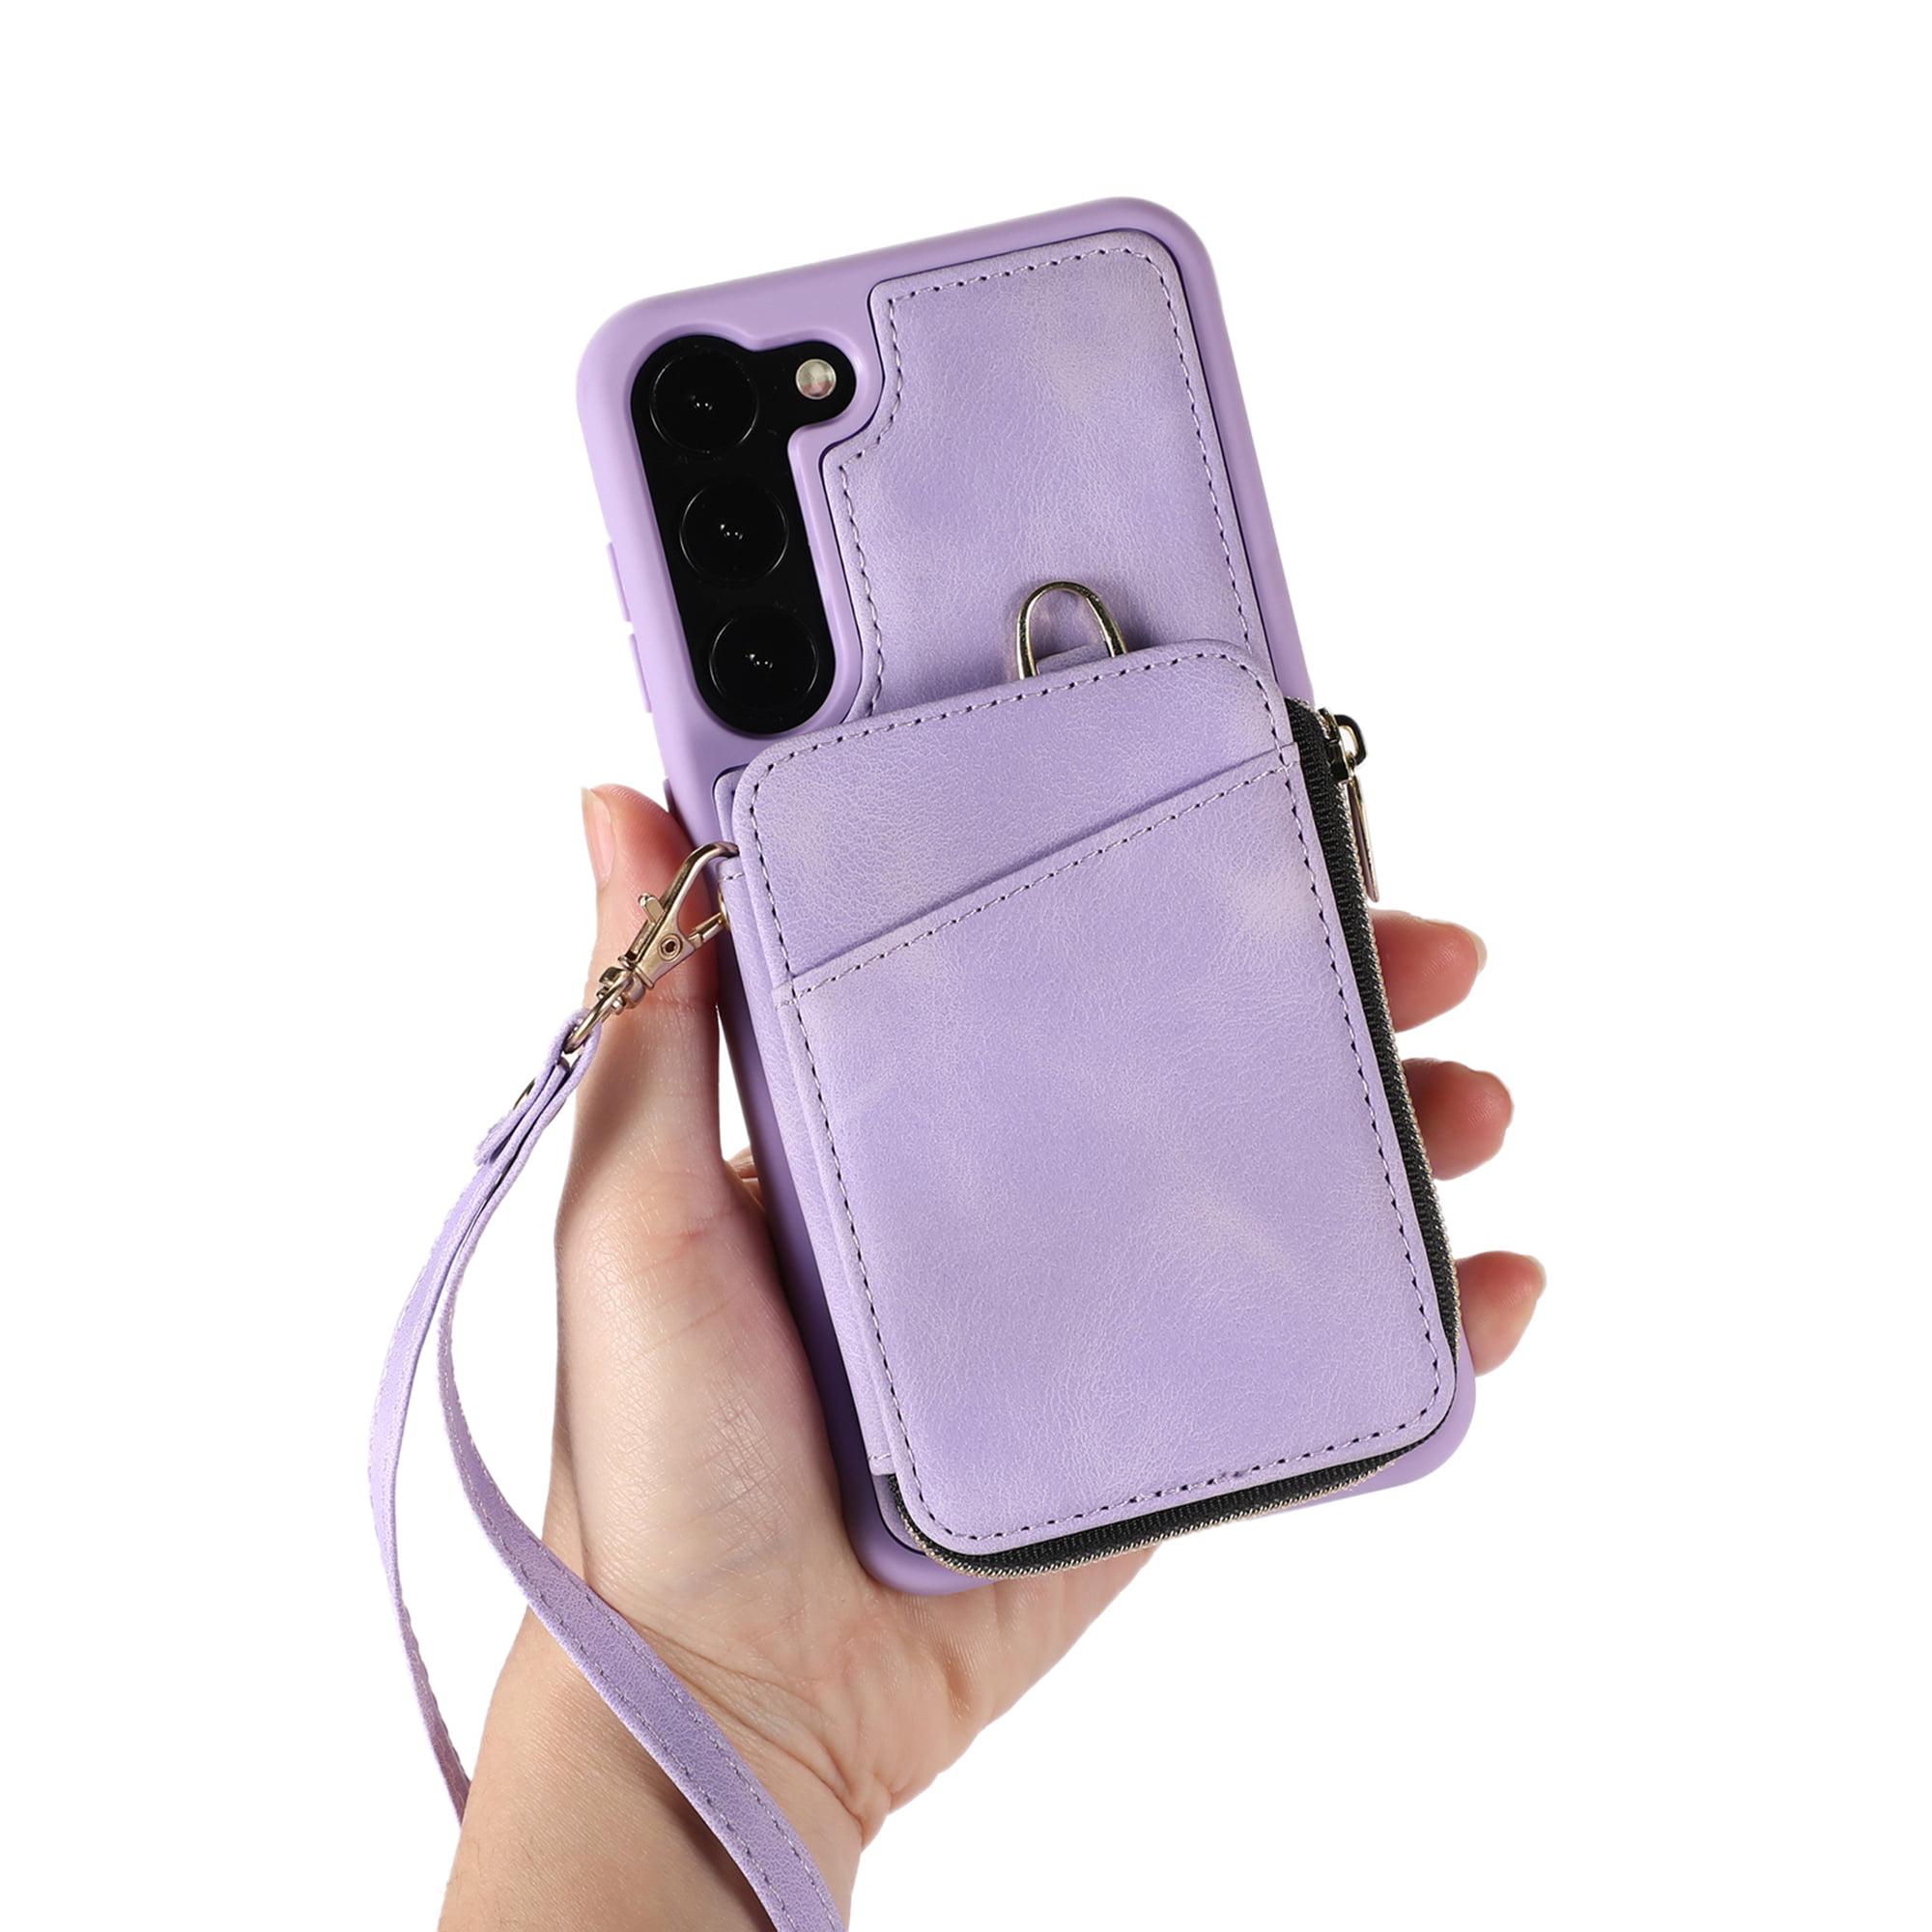 Fashion Multifunction Multi Card Slot Small Smart Mobile Phone Pouch For  Galaxy S23 S22 Ultra S21 Plus S10 5g S9 S8 Plus S7 Edge Case Wallet  Crossbody Bag Handbag And Purse 